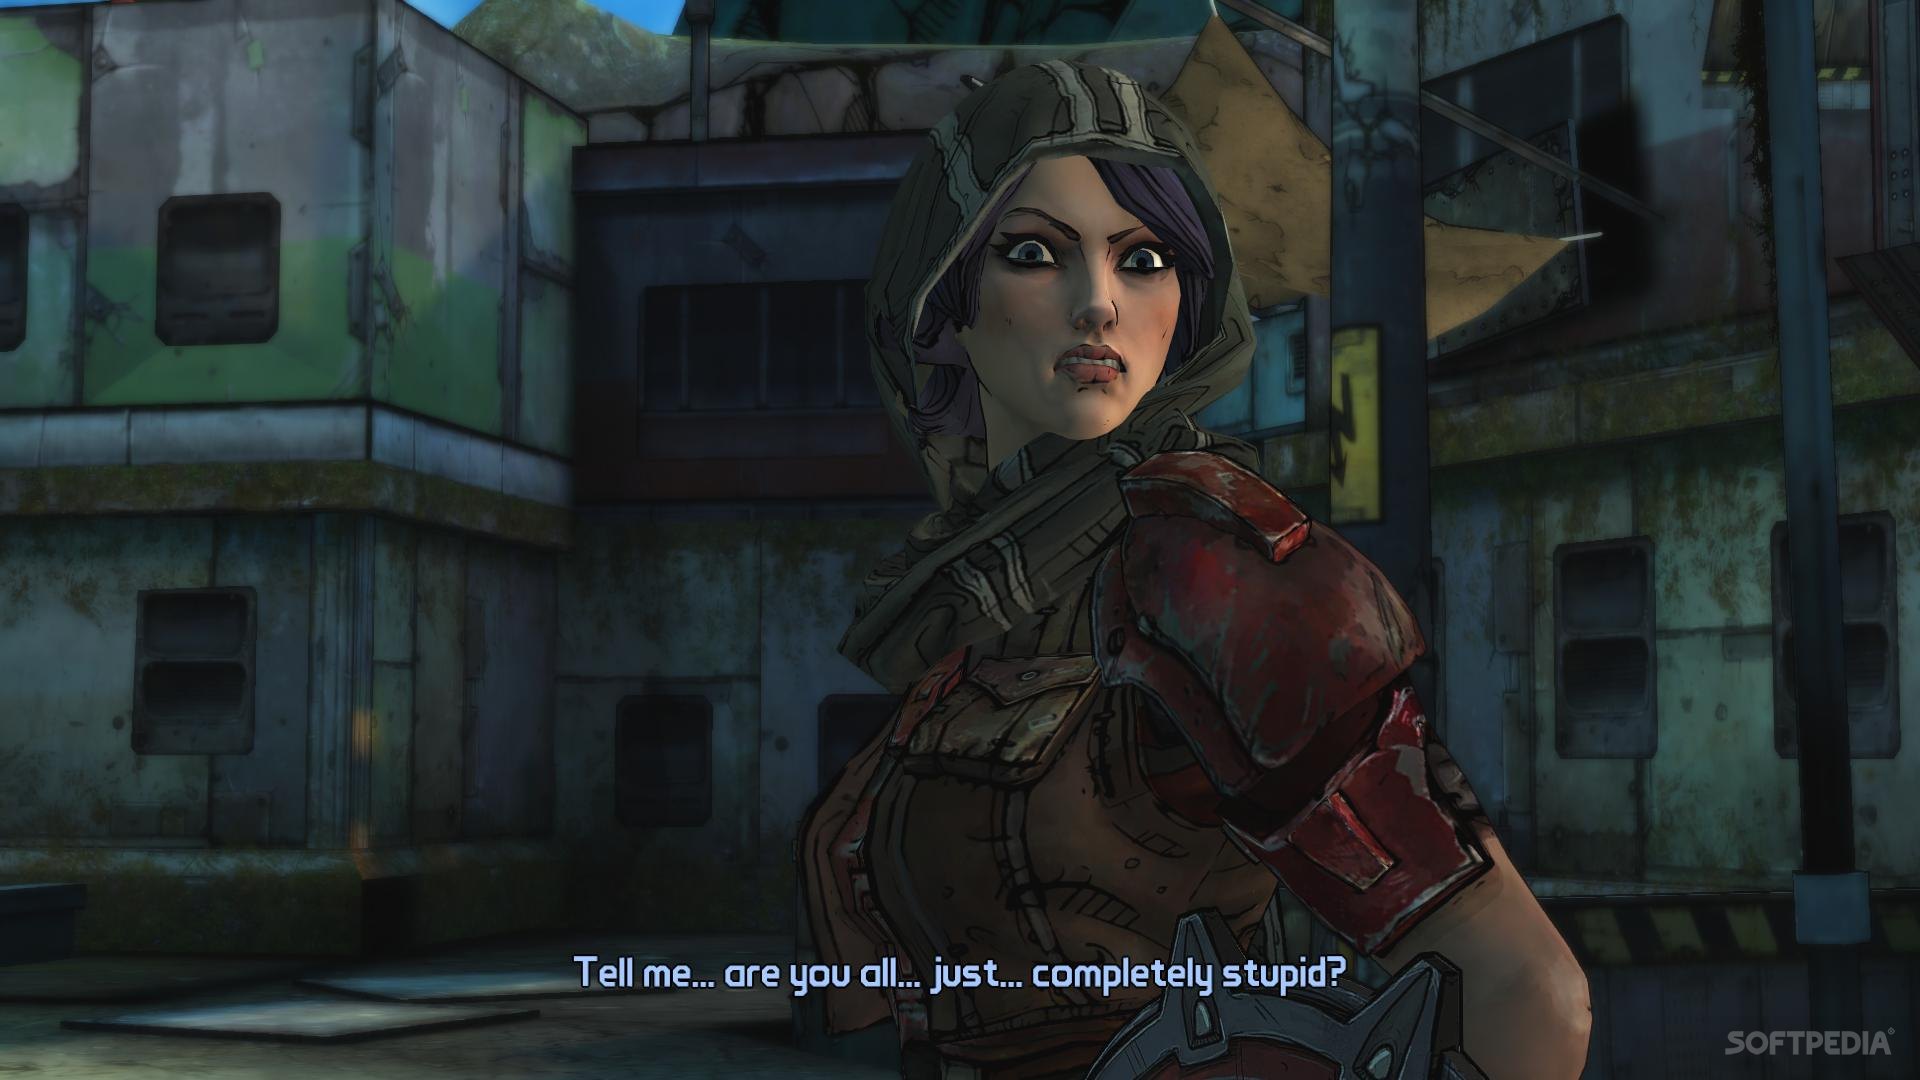 Athena returns in Tales from the Borderlands.